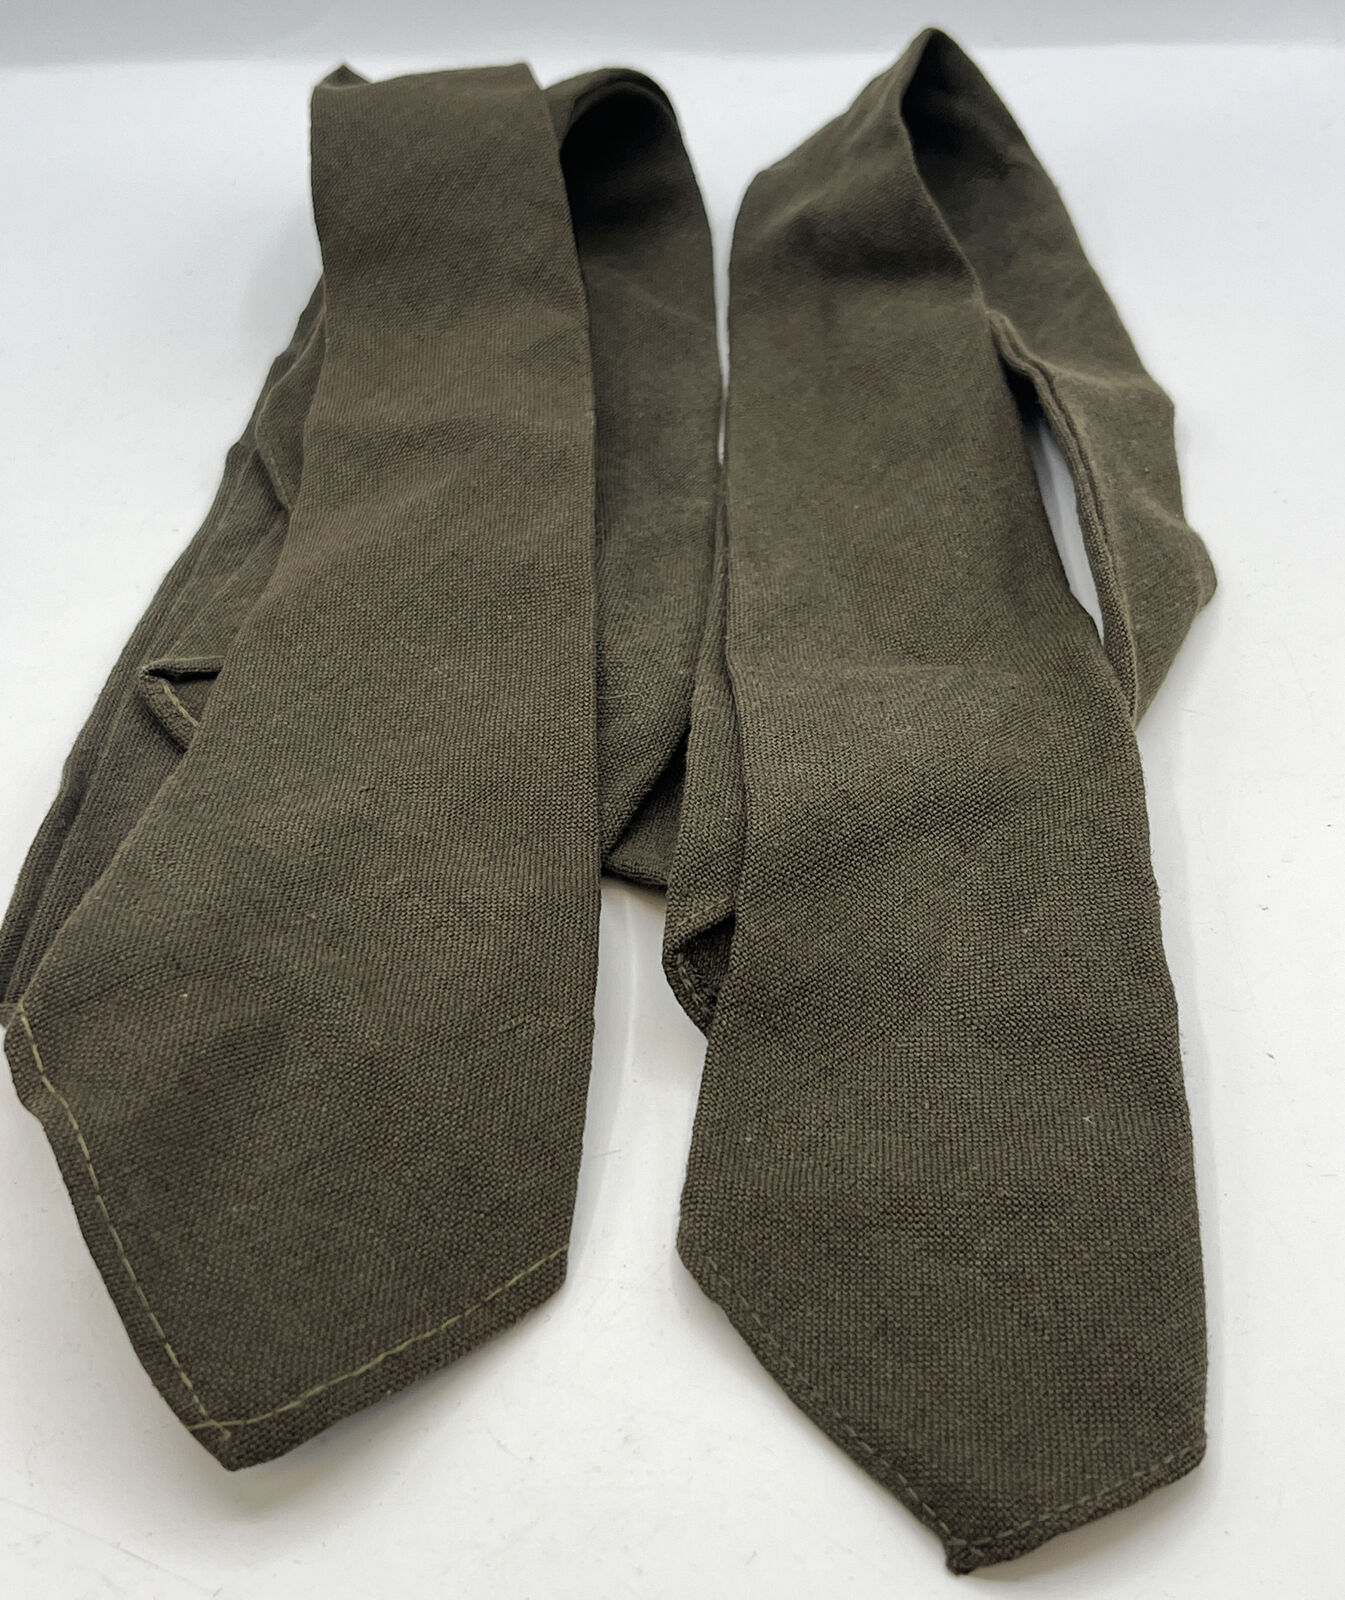 WWII US Army Neck Tie OD Green K-1918 B6541 Lot 2 Vintage Military Fully Intact